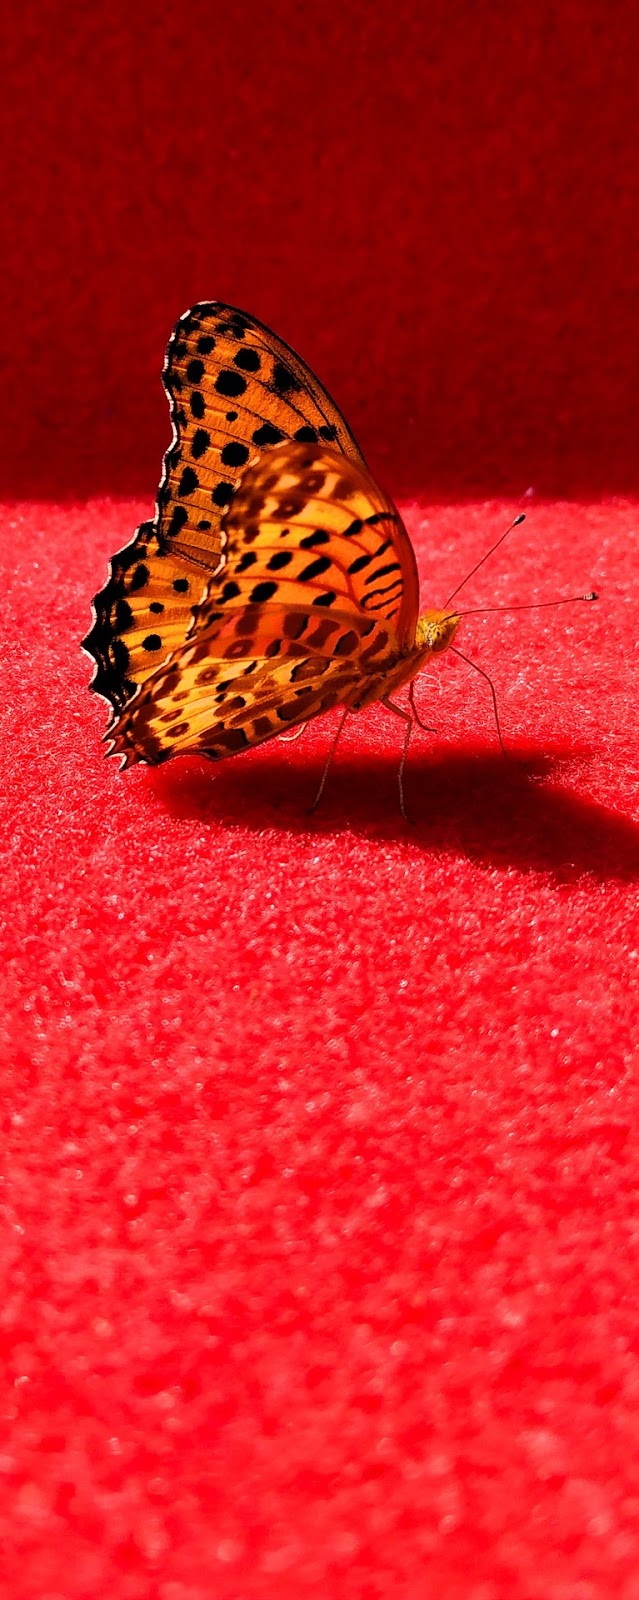 A butterfly on a red carpet.